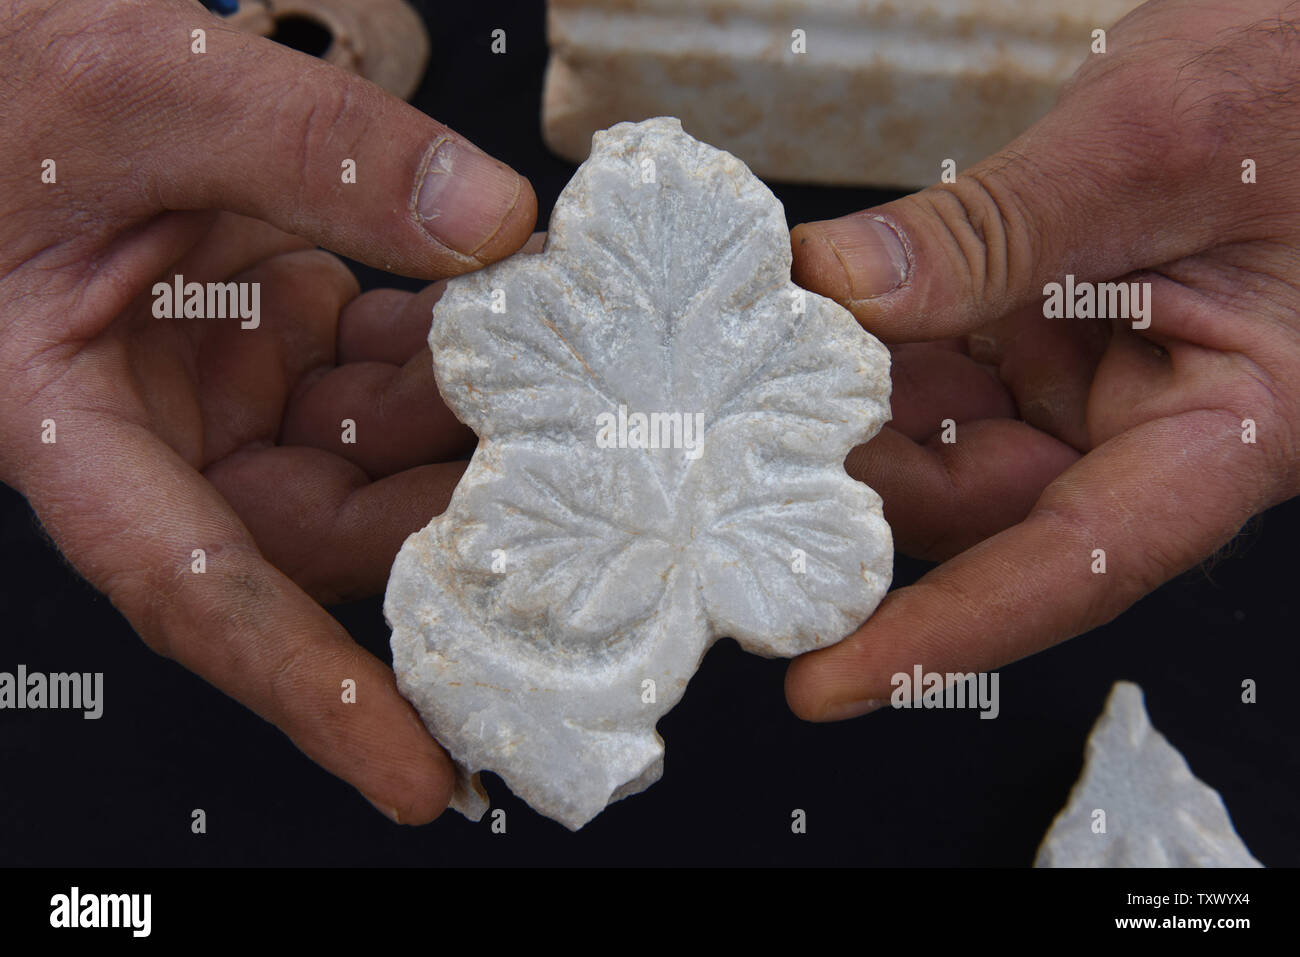 Naftali Aizik, an archeologist with the Israel Antiquities Authority, shows an imported marble grape leaf discovered in an 1,5000 year old Byzantine Period monastery and church uncovered during large scale excavations in Beit Shemesh, Israel, December 20, 2017. The Byzantine structure was discovered during excavations prior to the expansion of Ramat Beit Shemesh for housing. The marble base is engraved with a Maltese cross. Artifacts were found and a number of architectural elements including a marble pillar base decorated with crosses and marble window screens. The artifacts found may indicat Stock Photo